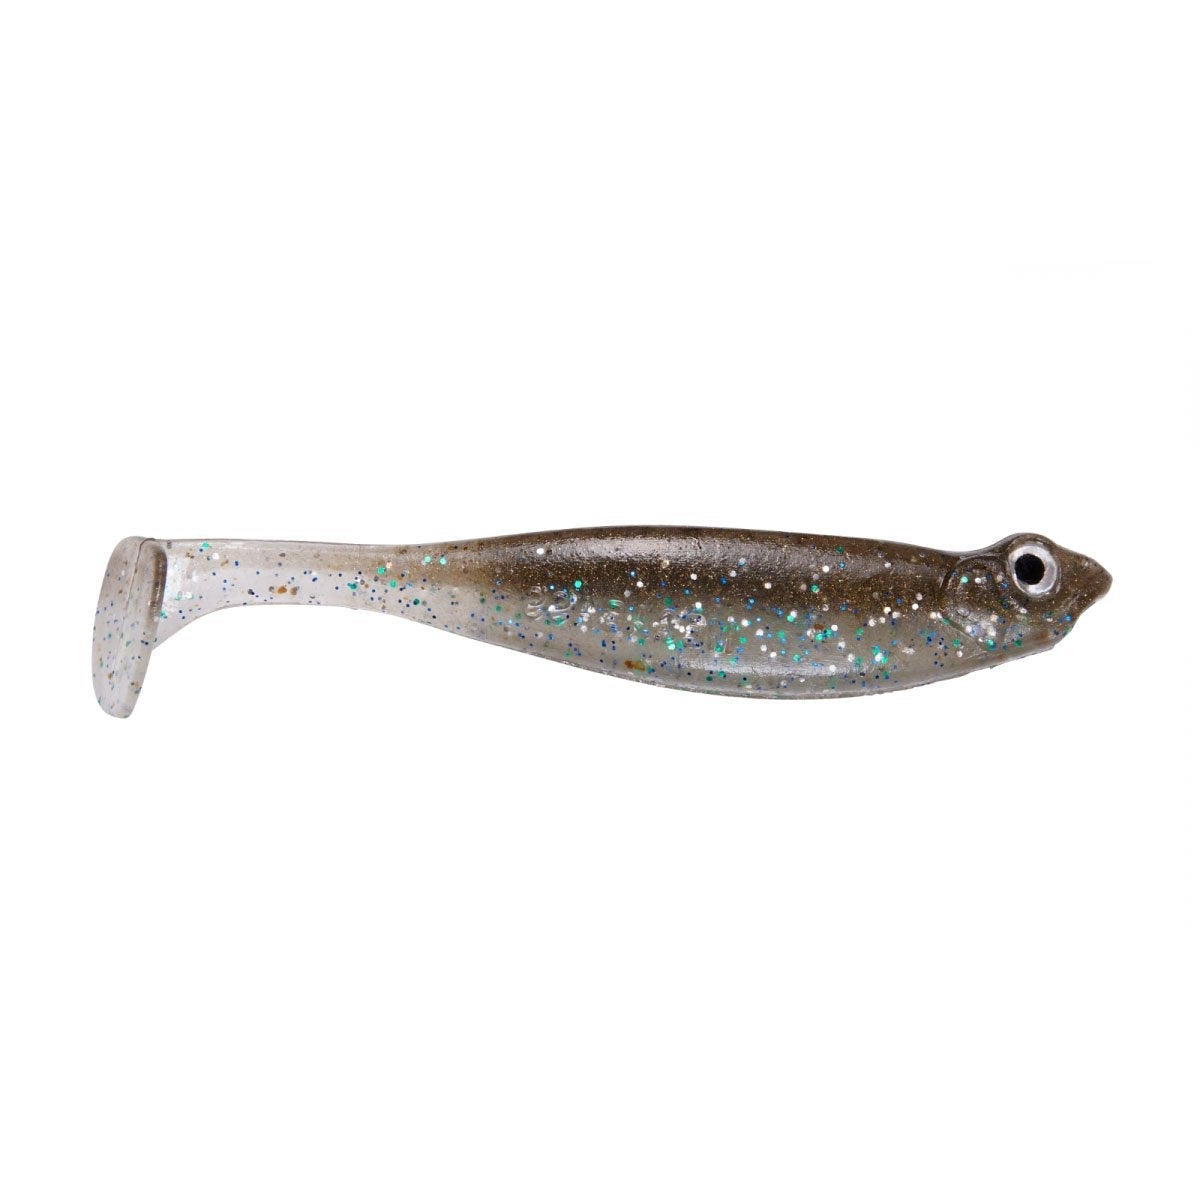 Megabass Hazedong Shad (4.2in) Tennessee Shad